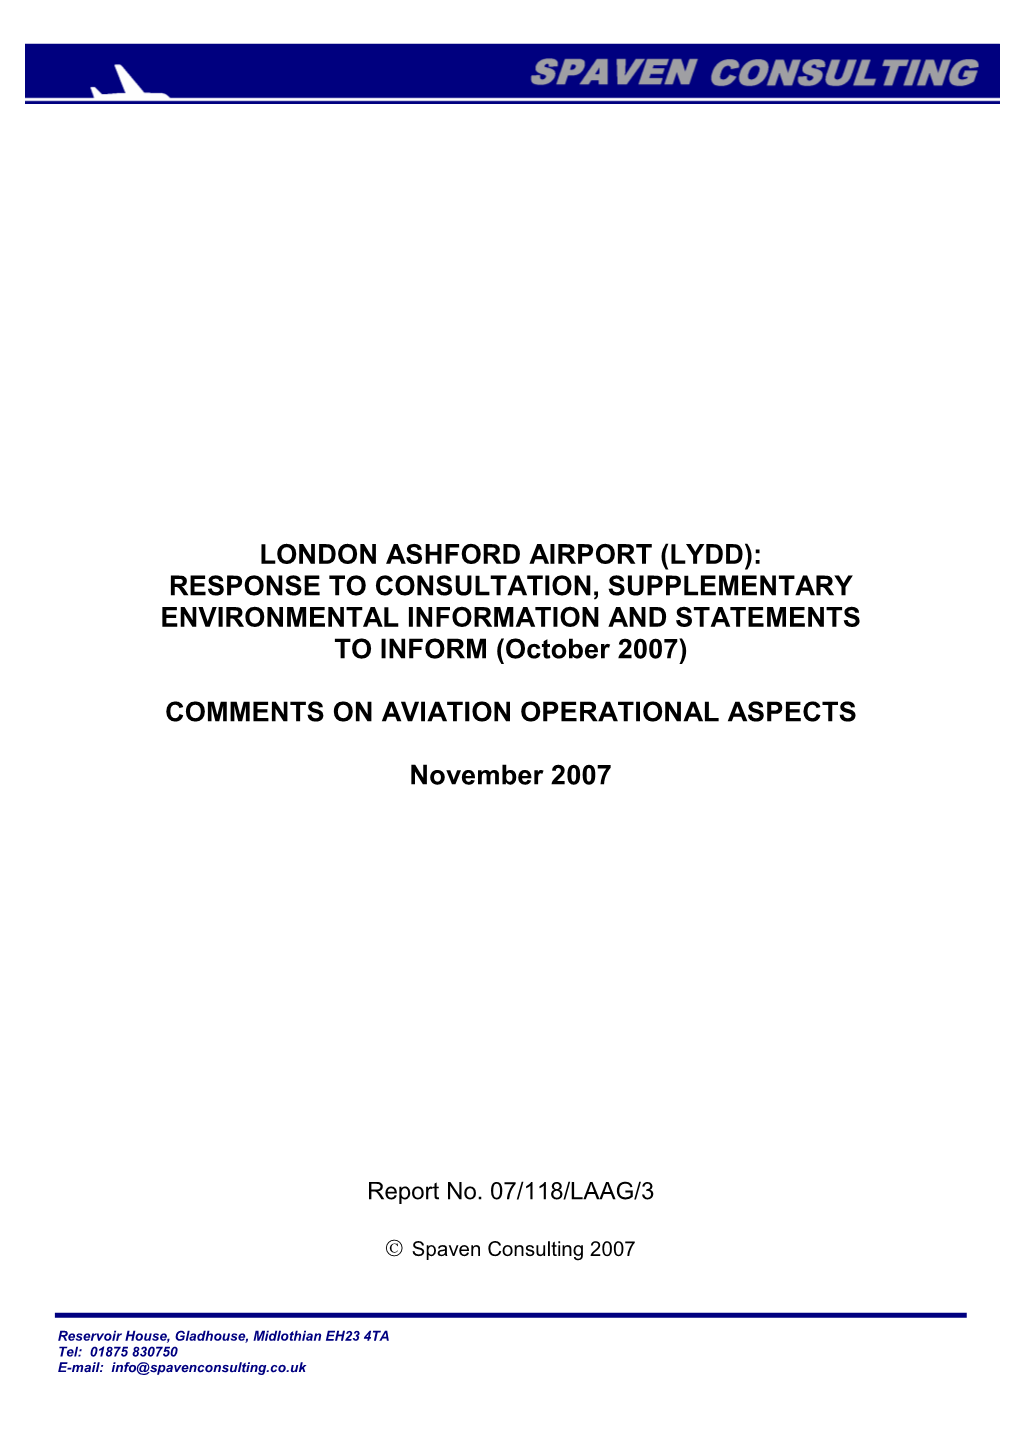 LONDON ASHFORD AIRPORT (LYDD): RESPONSE to CONSULTATION, SUPPLEMENTARY ENVIRONMENTAL INFORMATION and STATEMENTS to INFORM (October 2007)